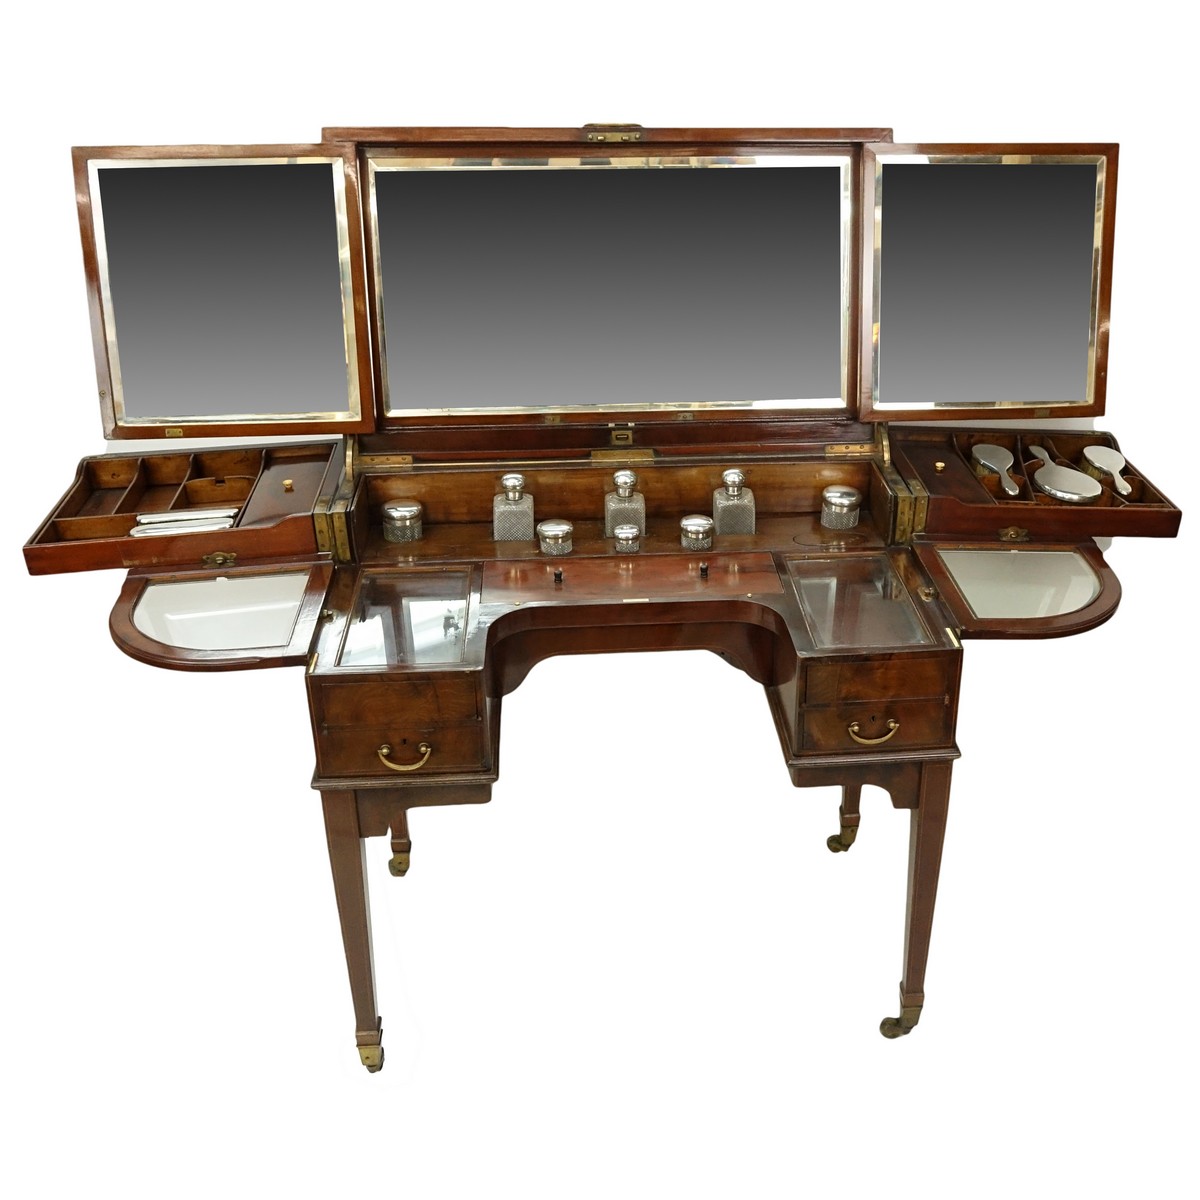 Attributed to: George Betjeman & Sons Circa 1910 Edwardian Mahogany Enclosed Dressing Table. The rectangular hinged top enclosing an interior fitted with three beveled mirror plates, above two hinged compartments flanked by two glass slides and a recessed